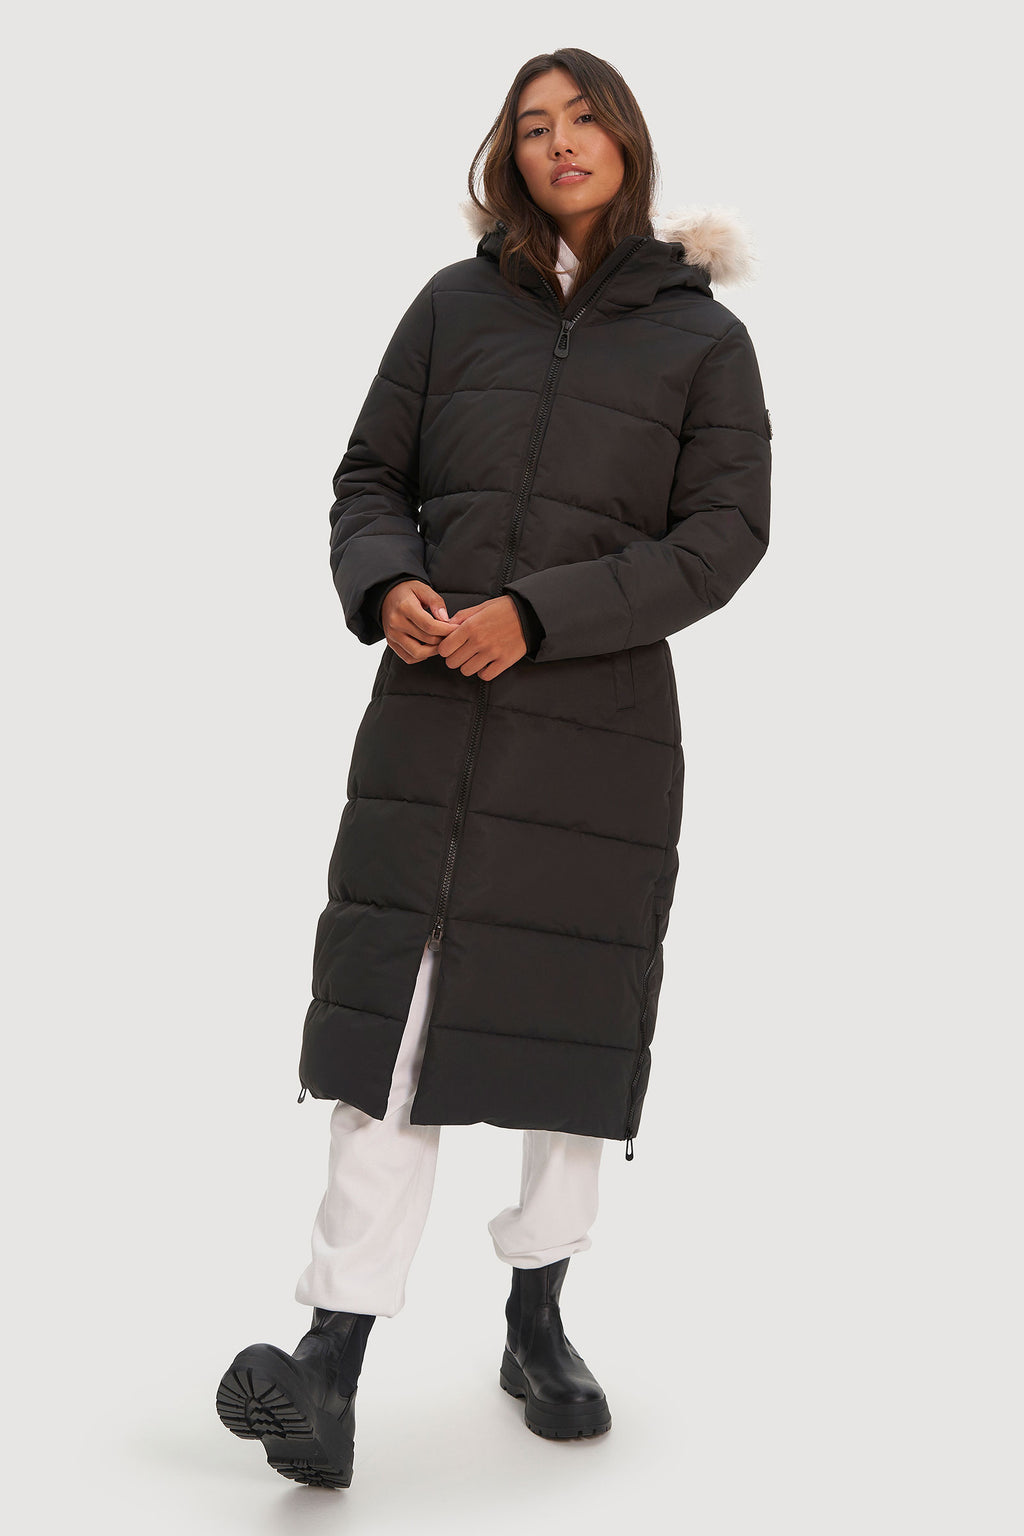 Women's Winter Coats Heavyweight Full Length Fleece Lined Maxi Puffer  Hooded Long Coat Reduced Price and Promotions